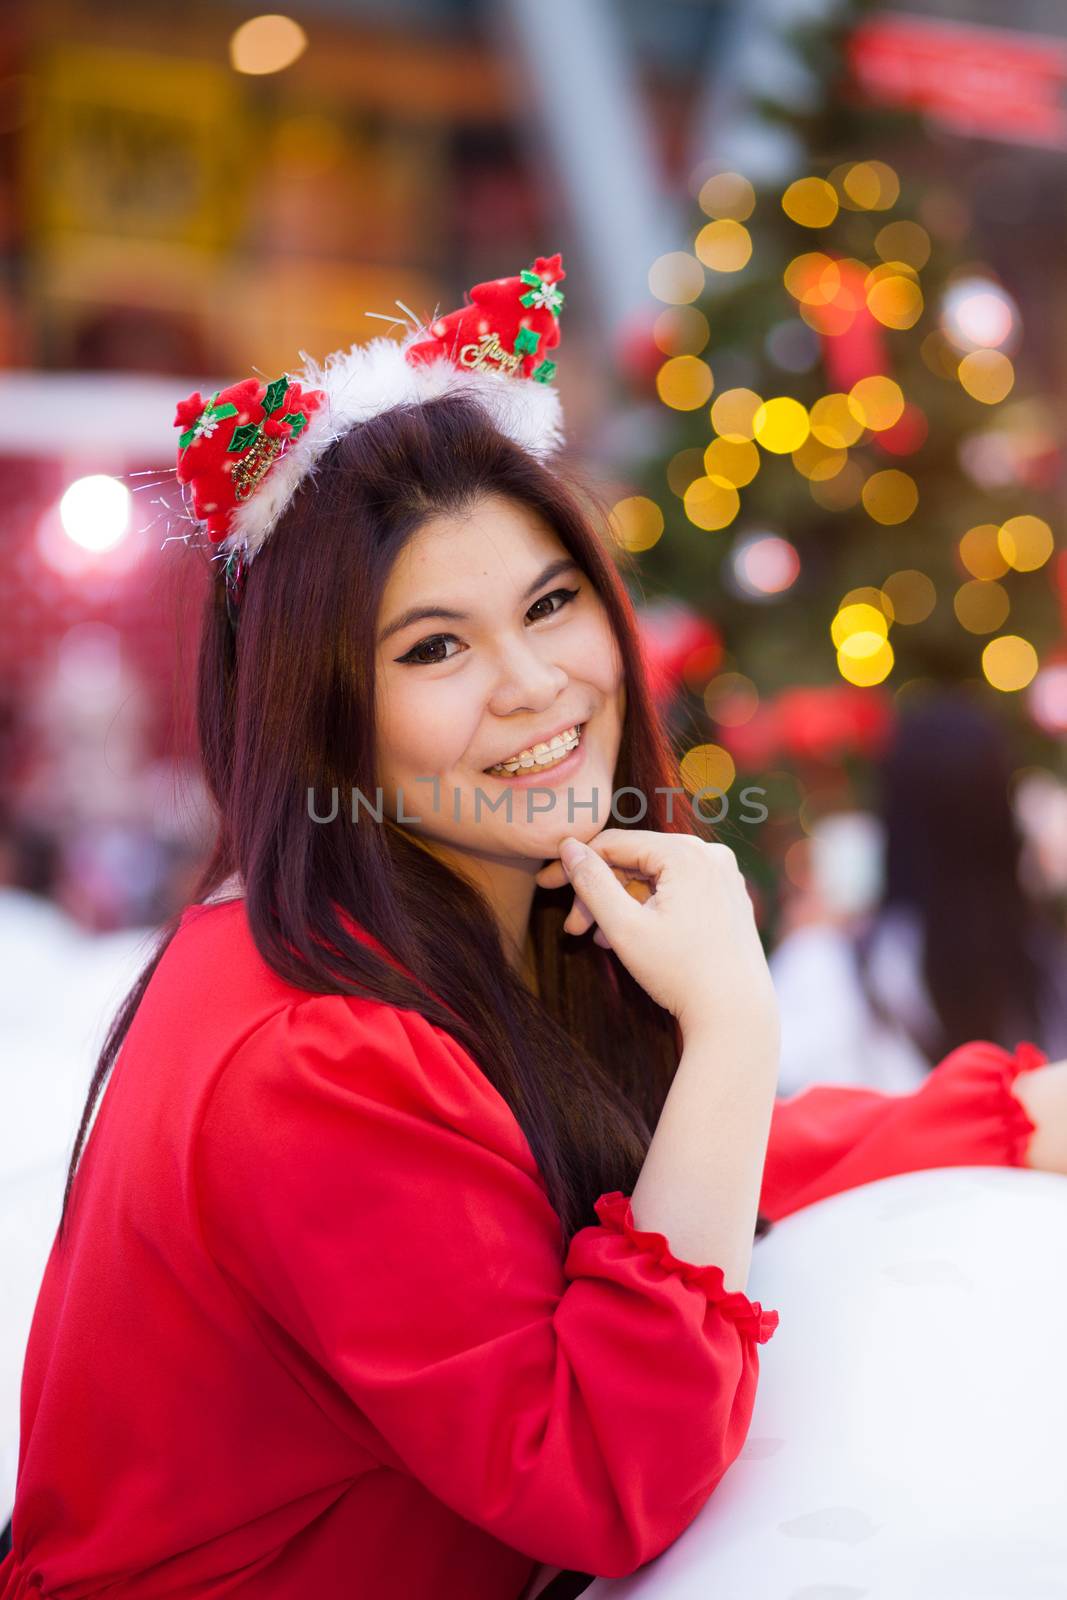 Happy and smile santa woman. by a454